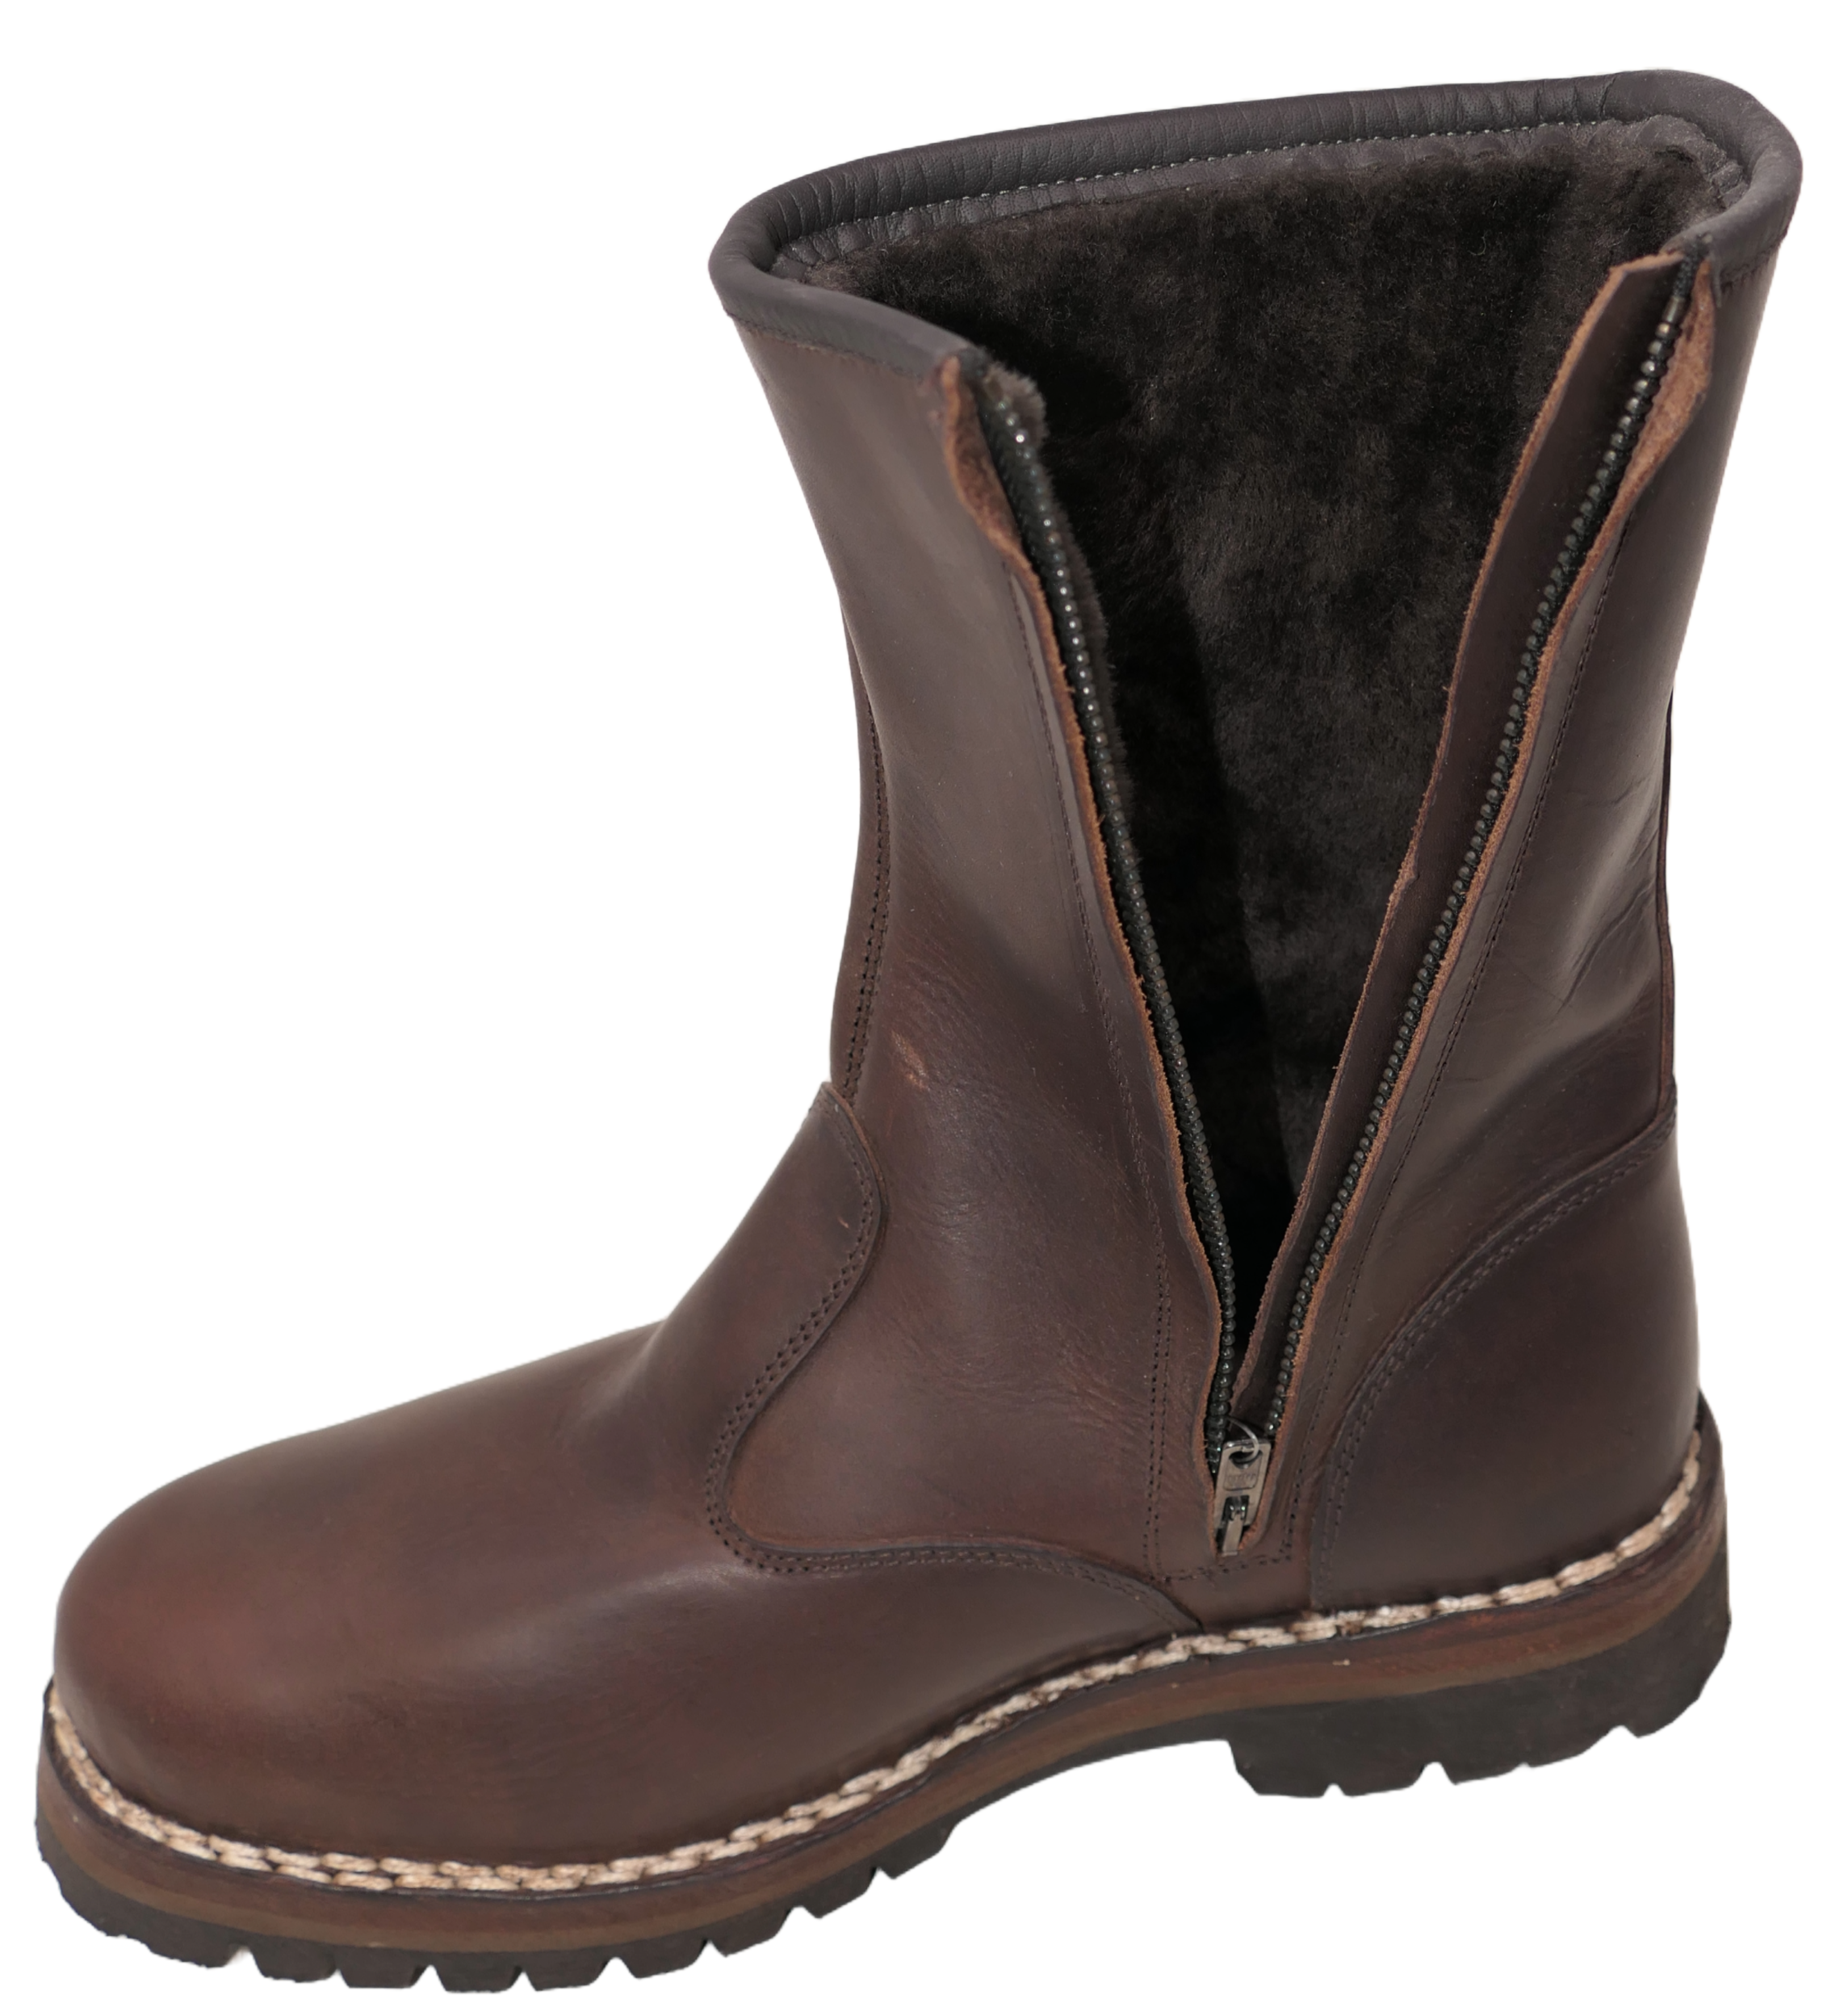 Anchorage Winterboot